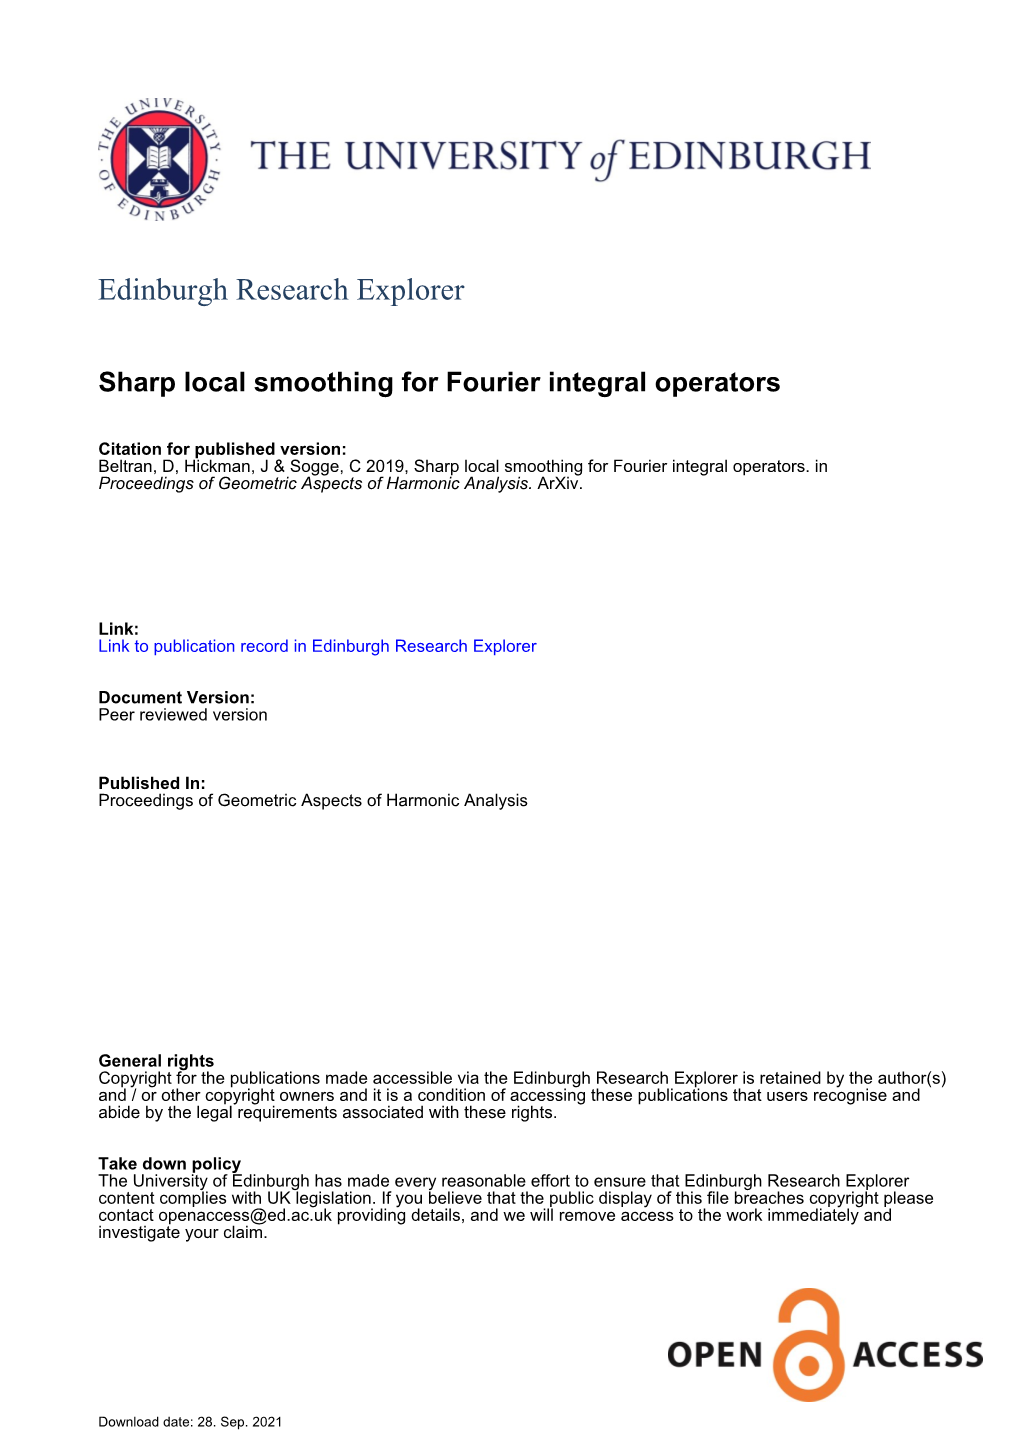 Sharp Local Smoothing for Fourier Integral Operators